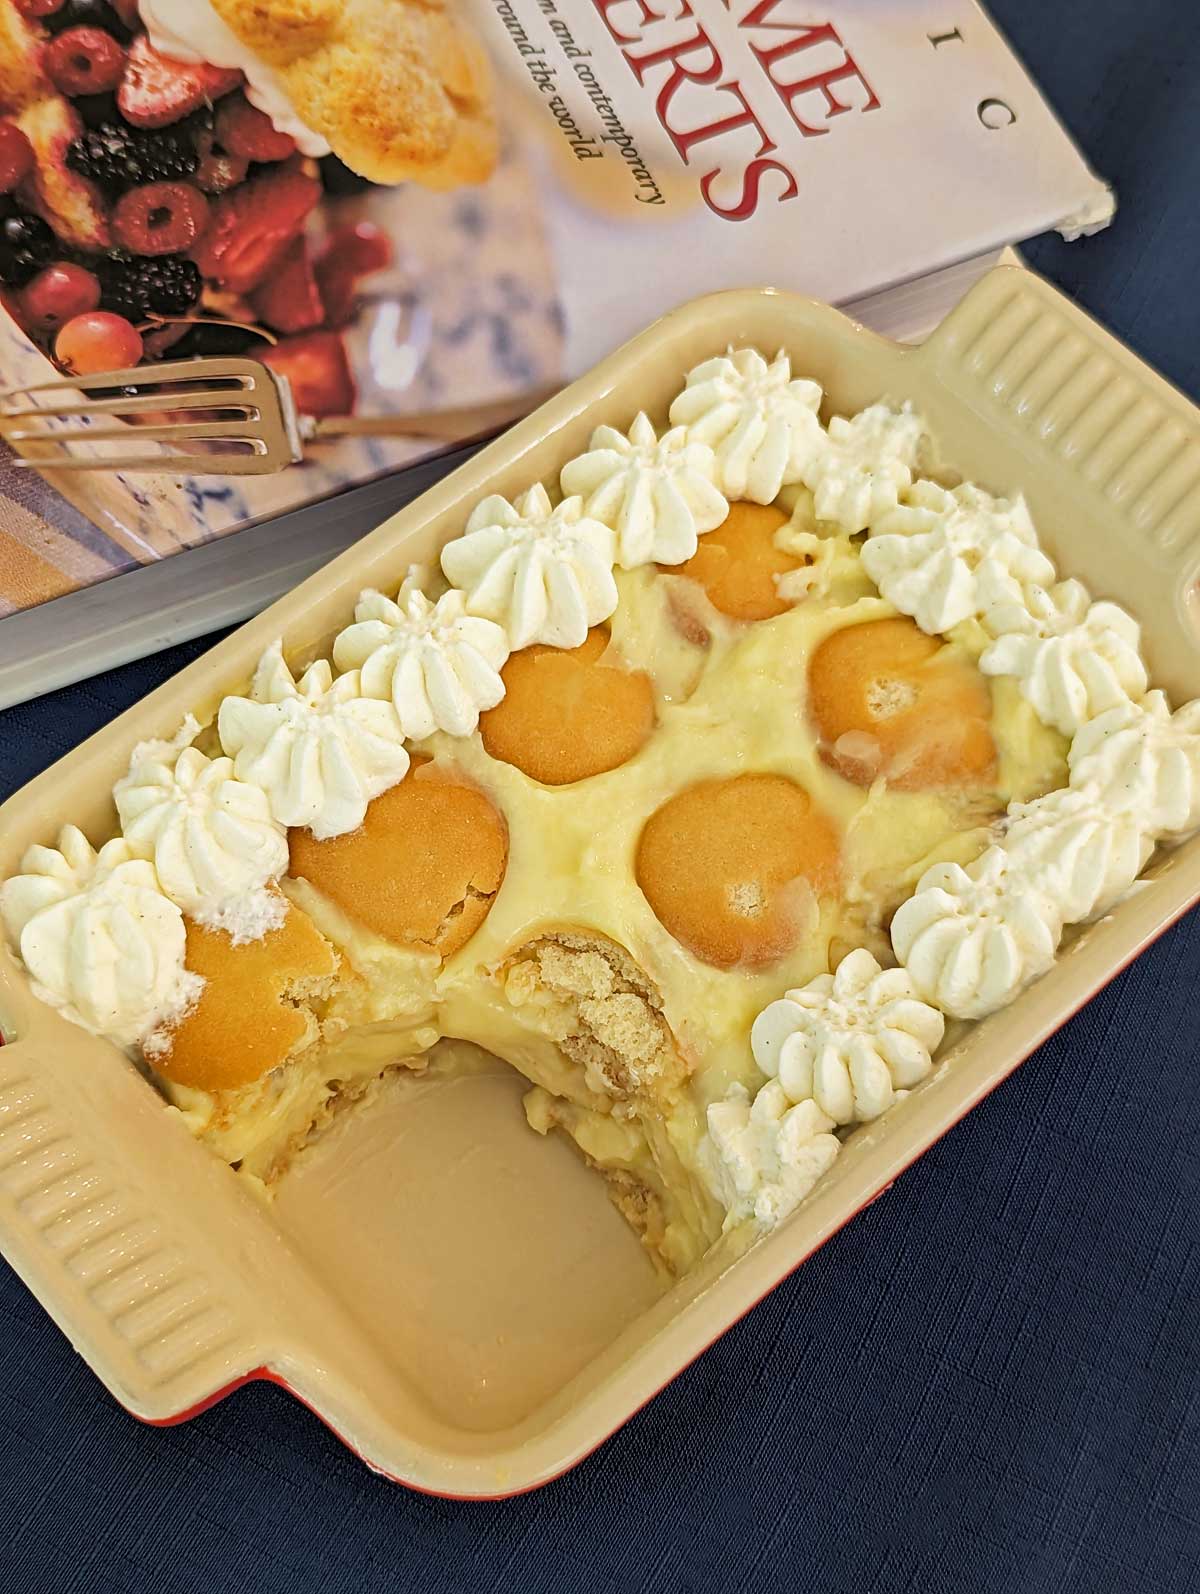 Richard Sax's Banana Pudding made with or without Nilla Wafers